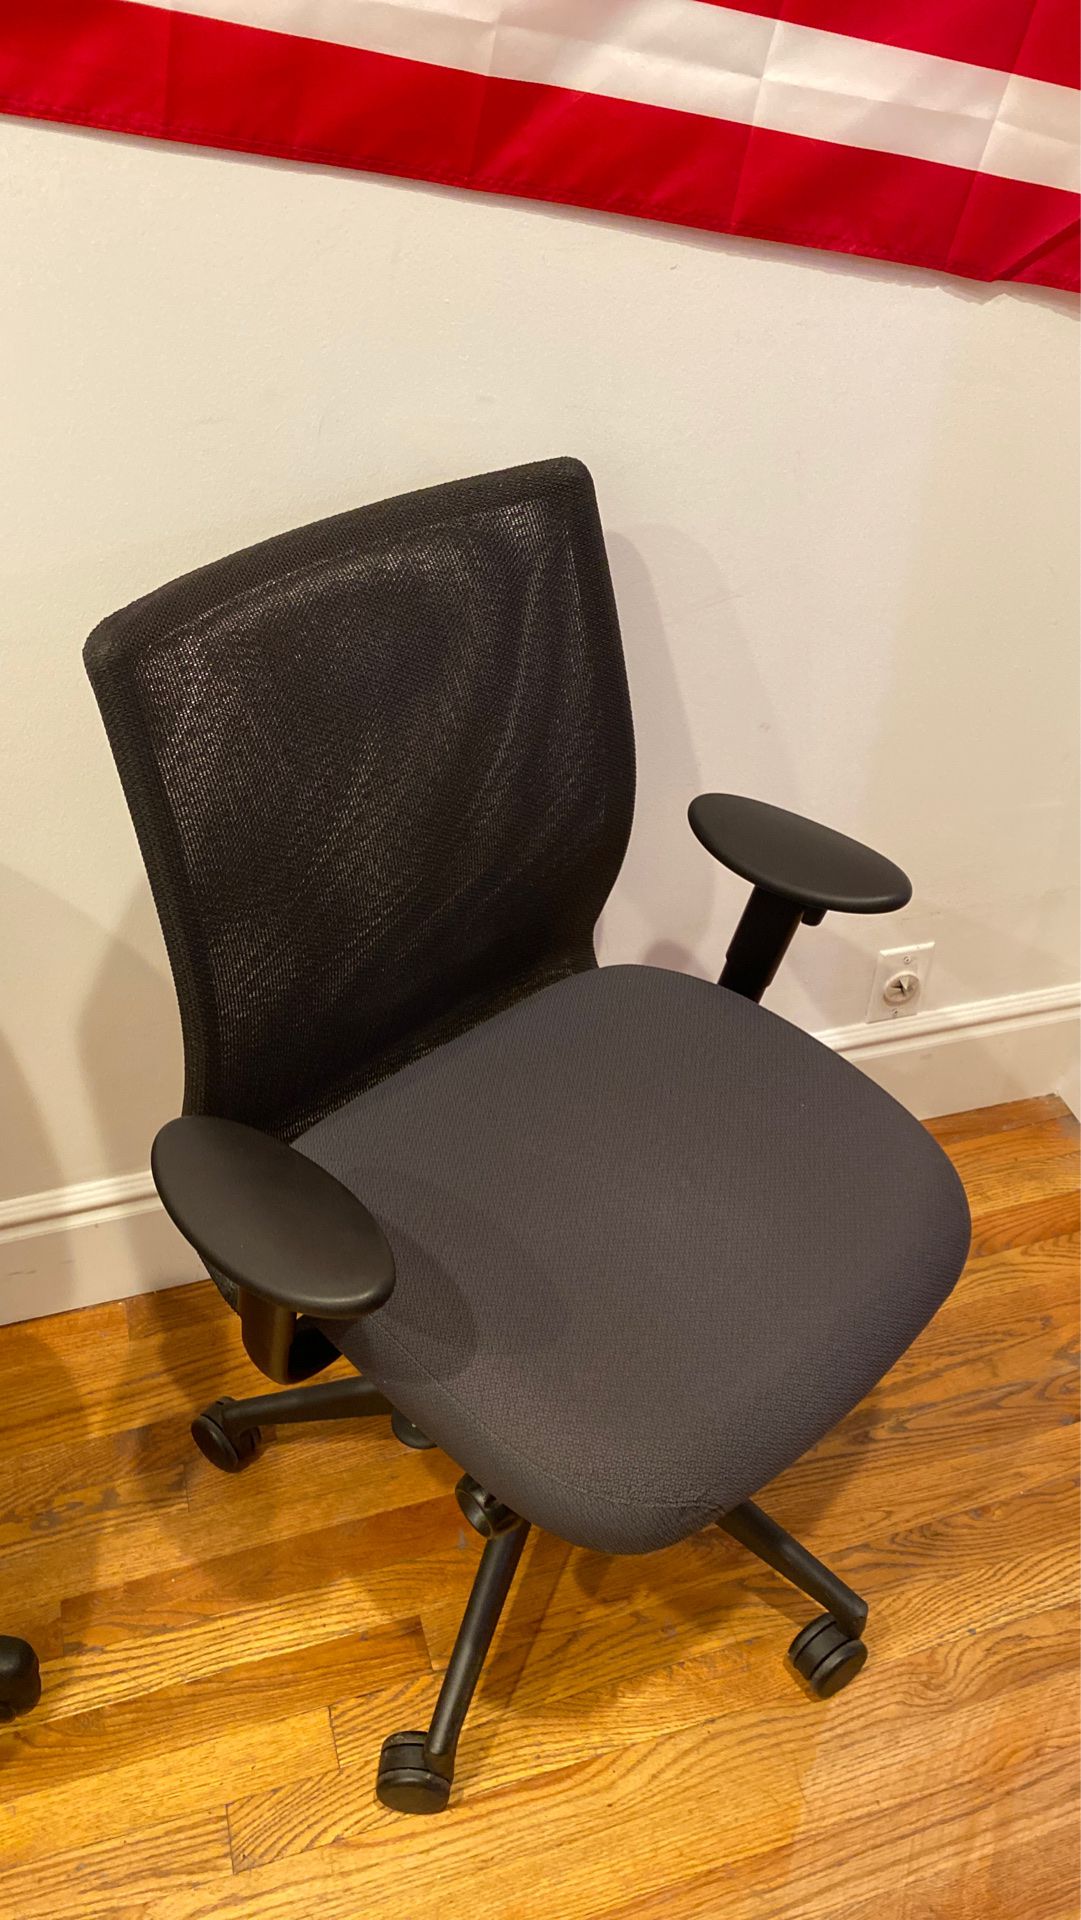 Office chairs - $10 each - 3 for $25